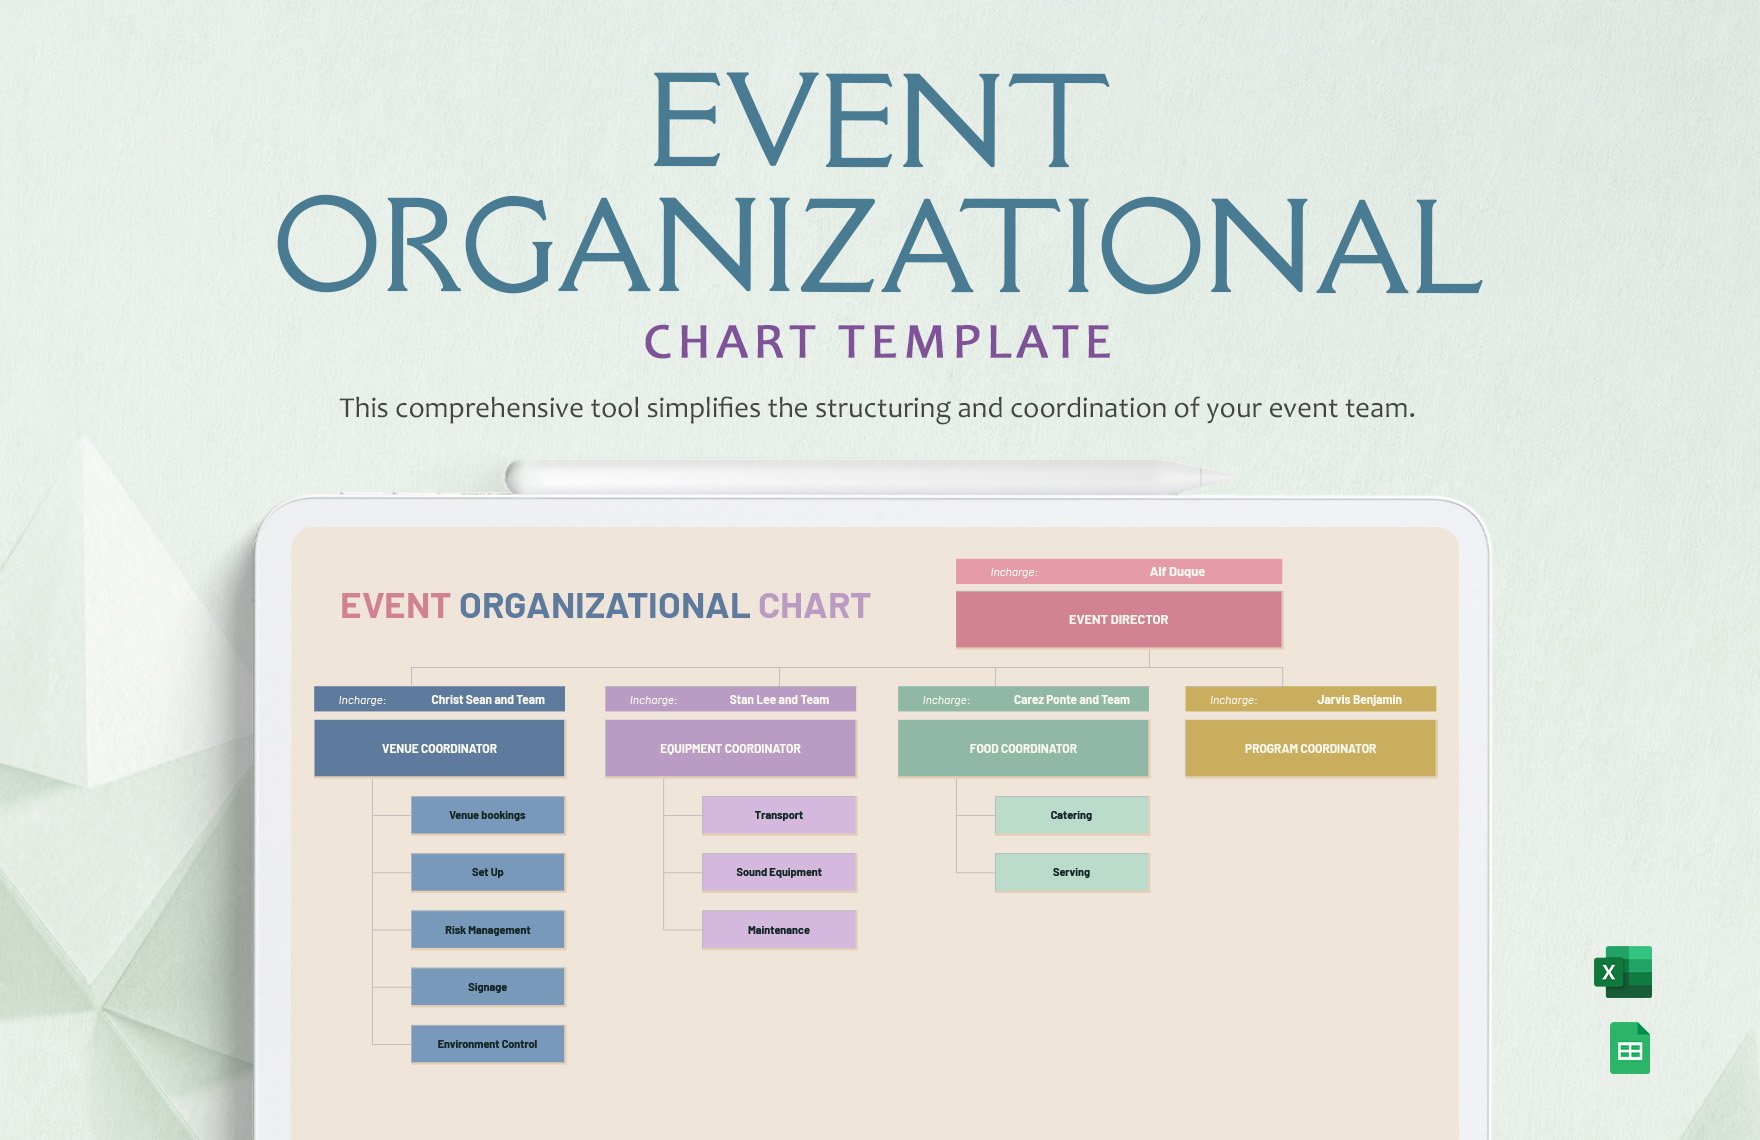 Event Organizational Chart Template in Excel, Google Sheets